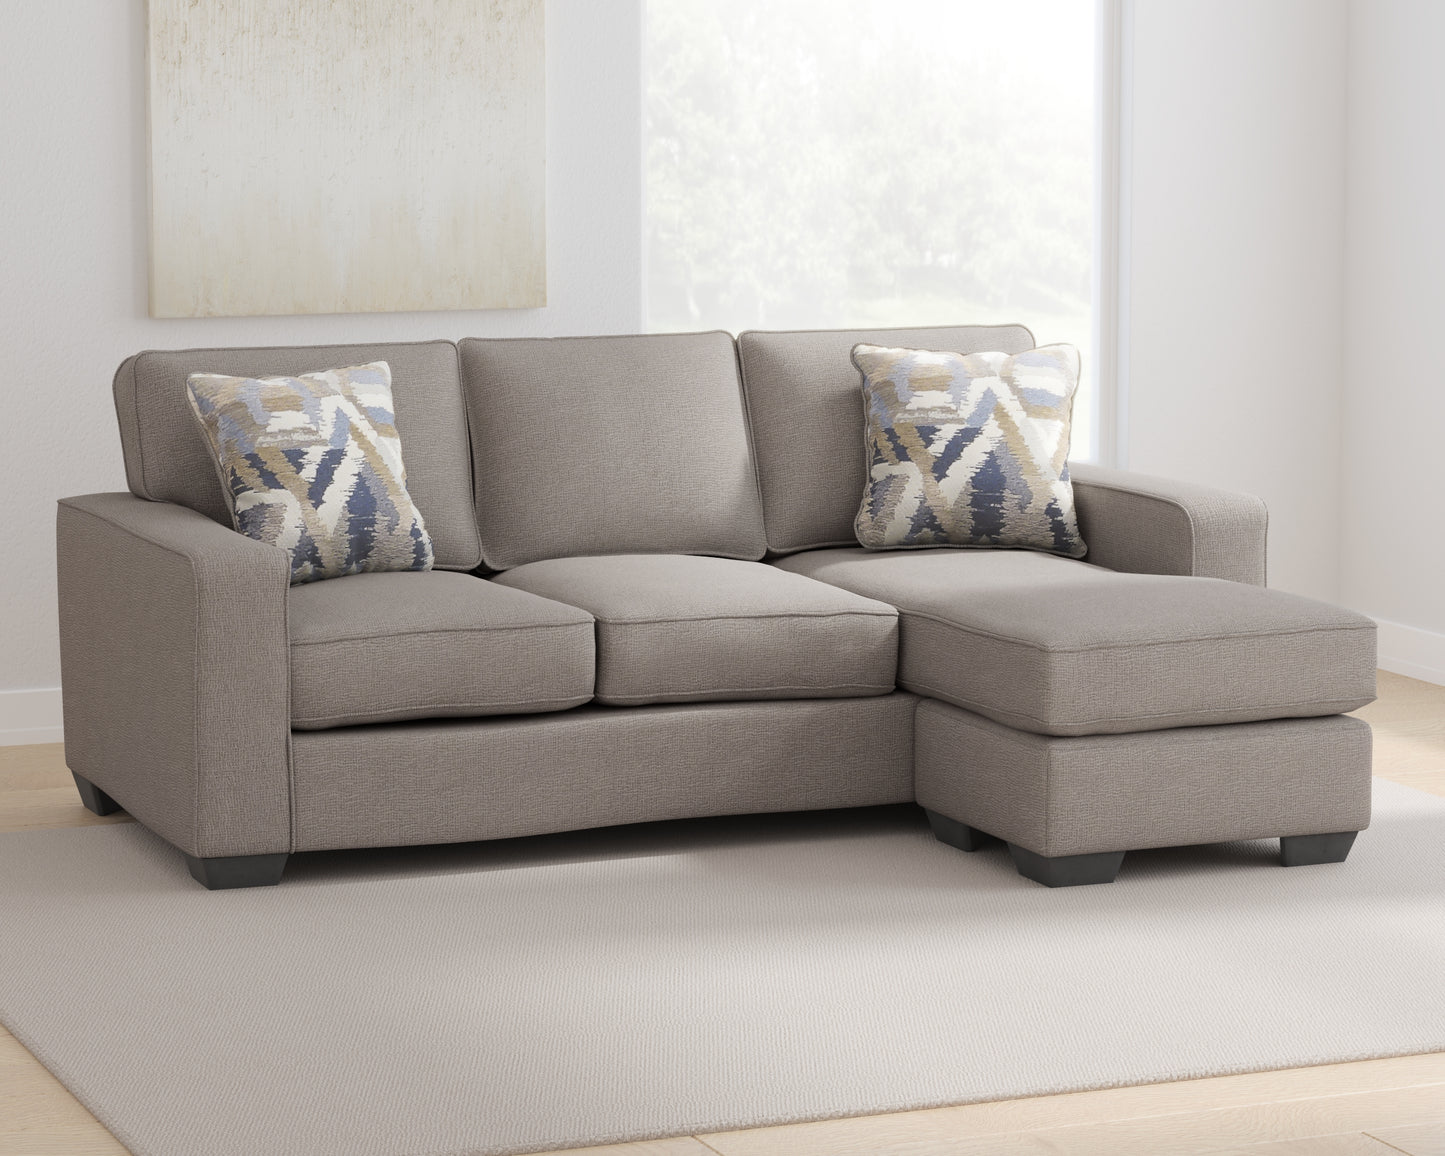 Greaves Living Room Collection - Ashley Furniture